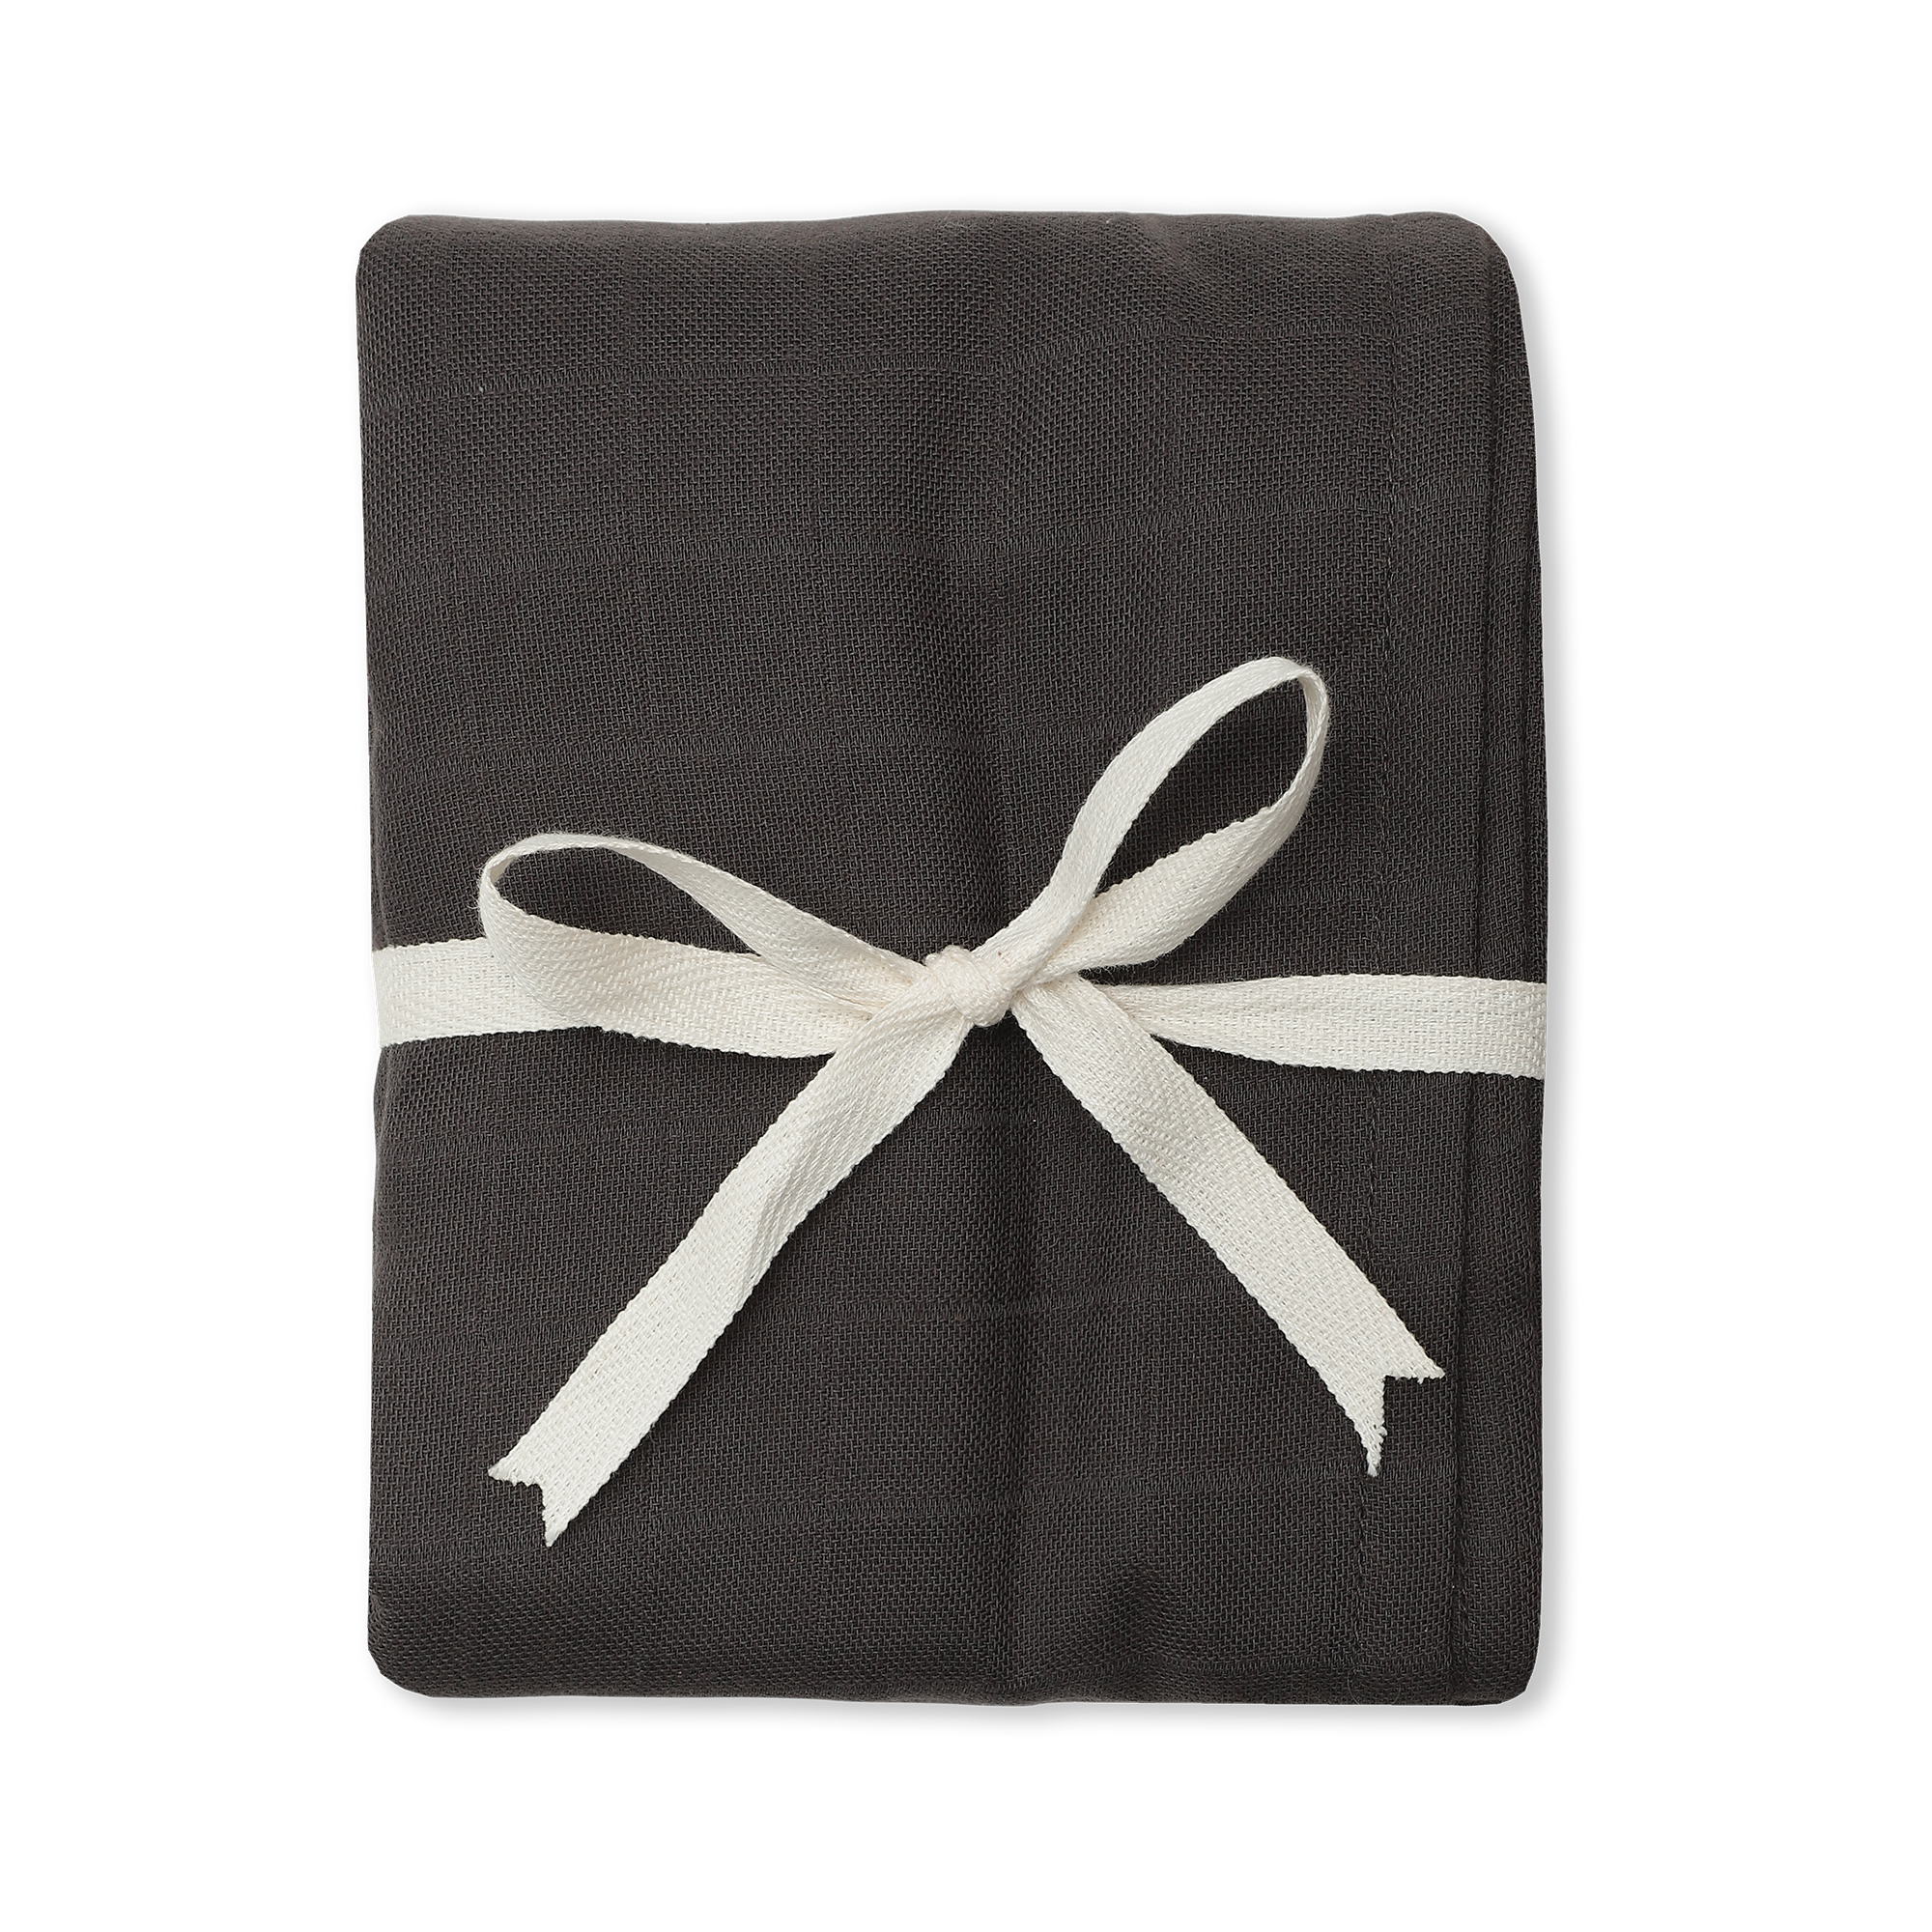 DAY ET - OR-S Swaddle - Licorice